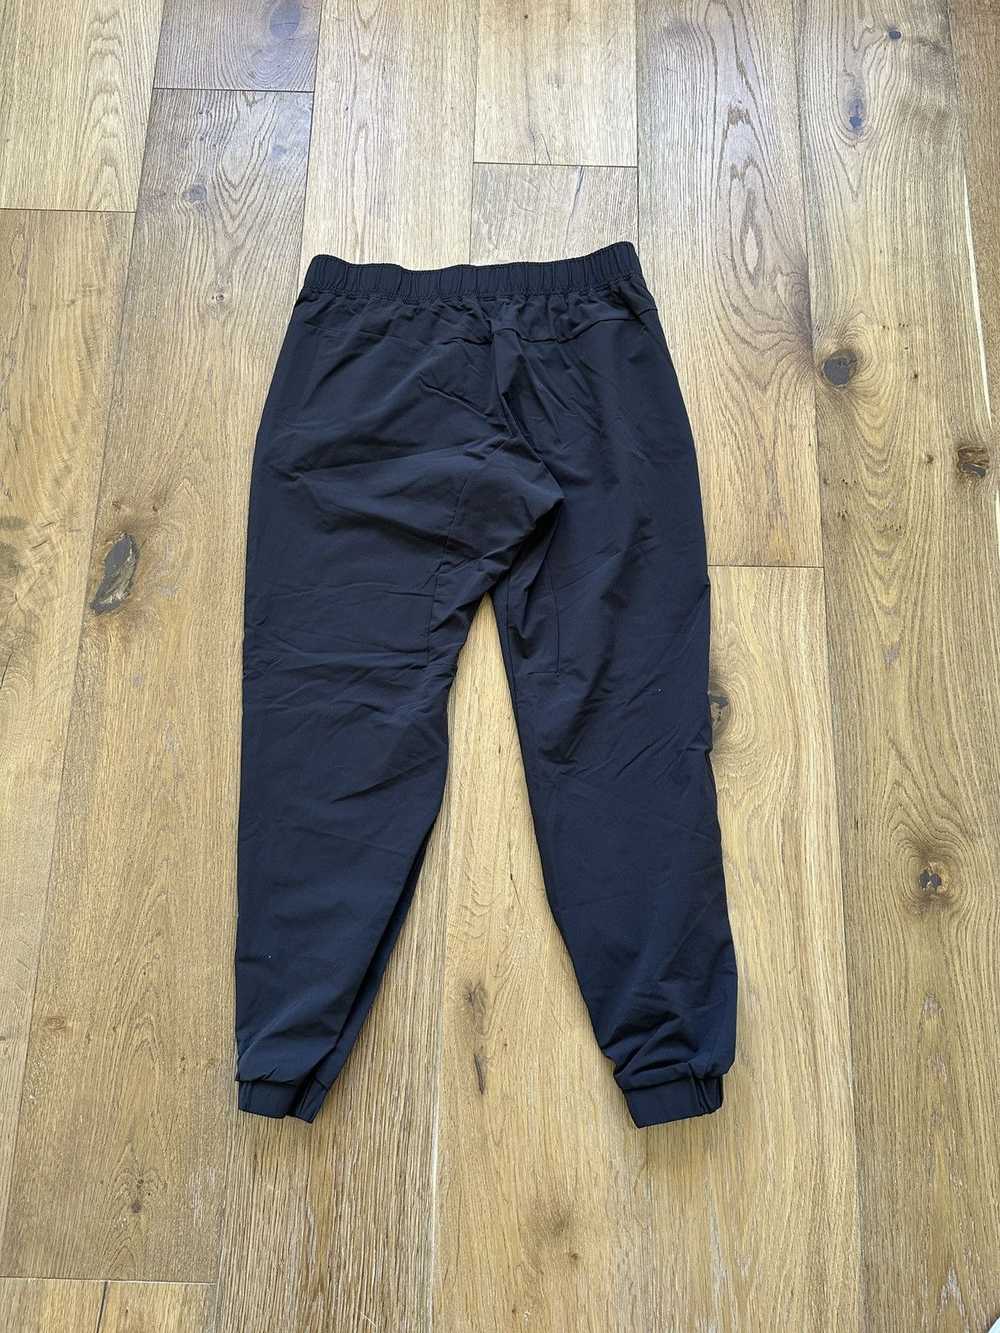 Olivers Apparel Workout Joggers in Grey - image 2